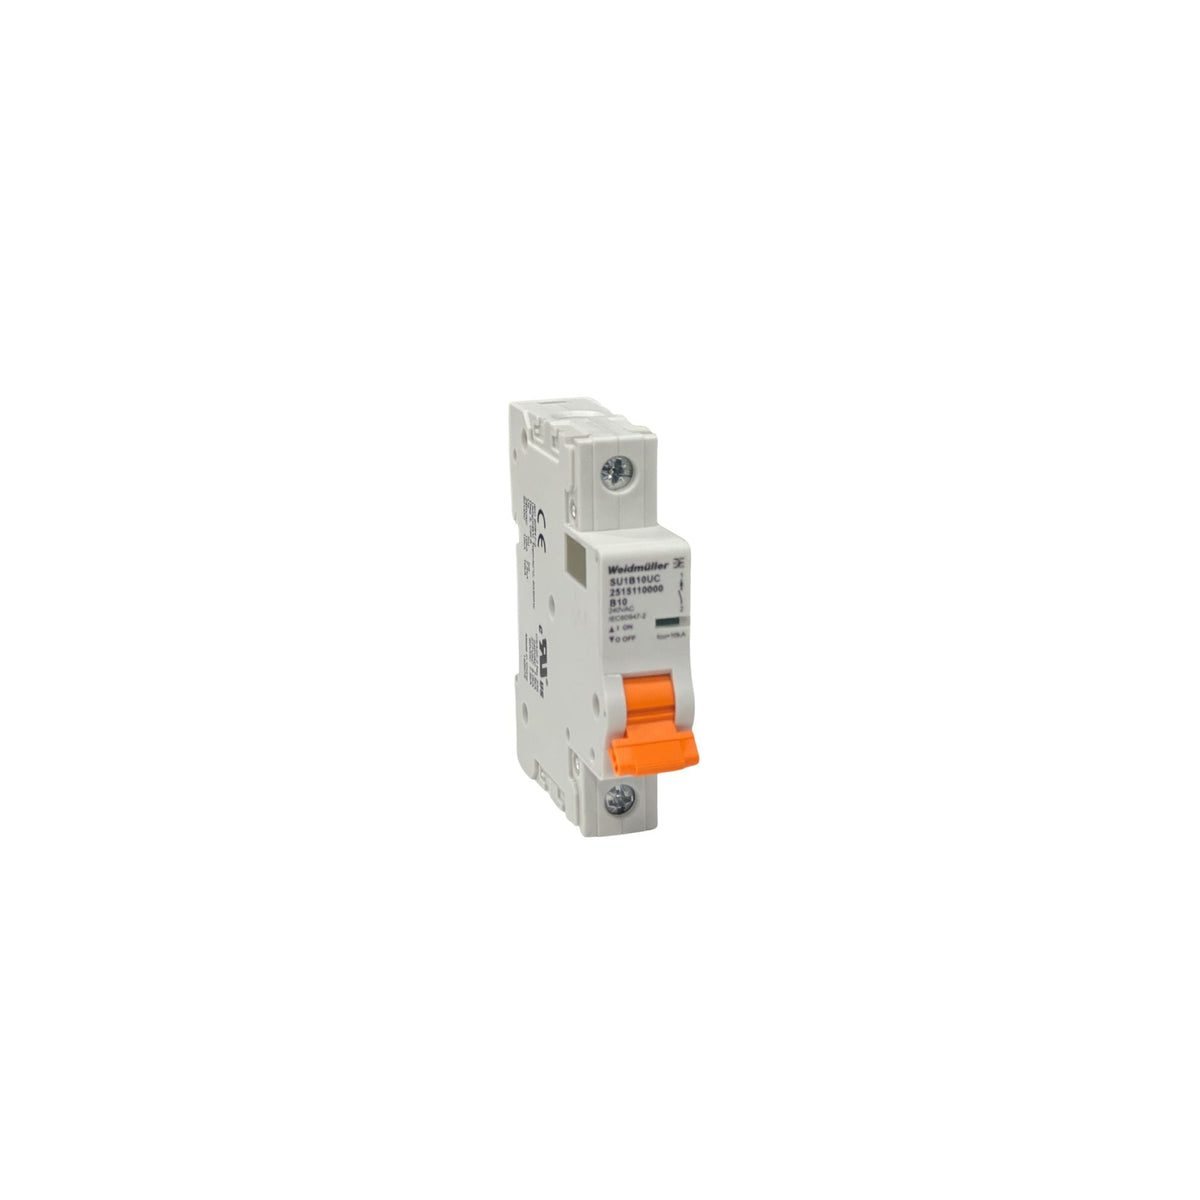 circuit breaker with orange switch and two screws, one on each end for mounting